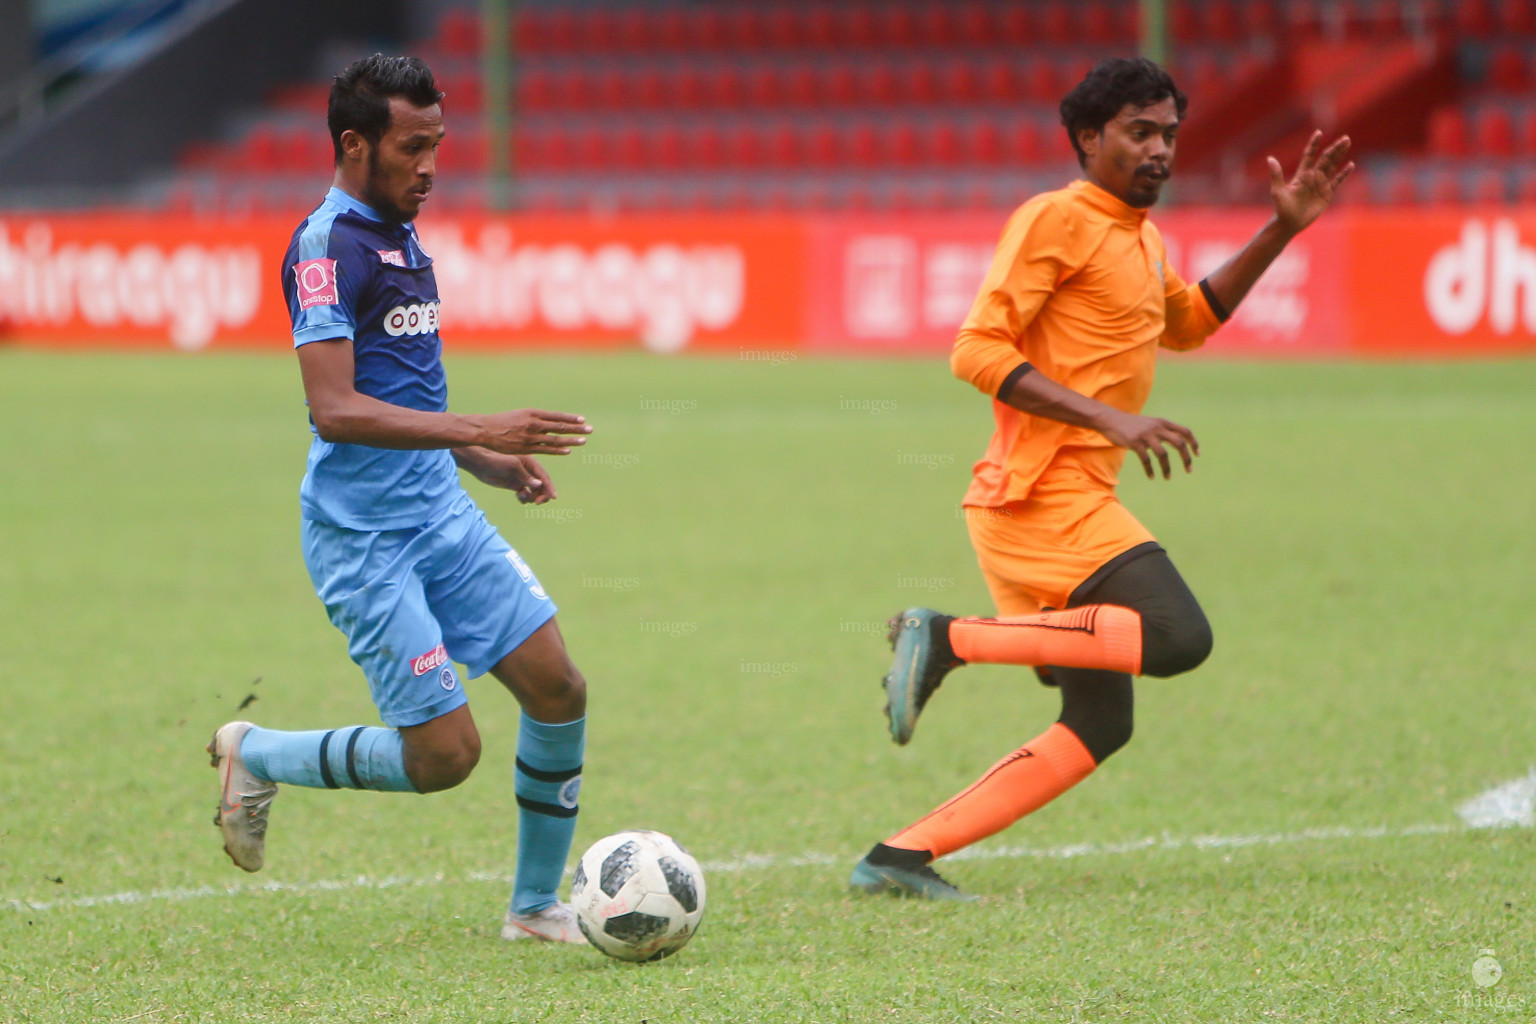 New Radiant SC vs Fehendhoo in Dhiraagu Dhivehi Premier League 2018 in Male, Maldives, Monday, October 1, 2018. (Images.mv Photo/Suadh Abdul Sattar)